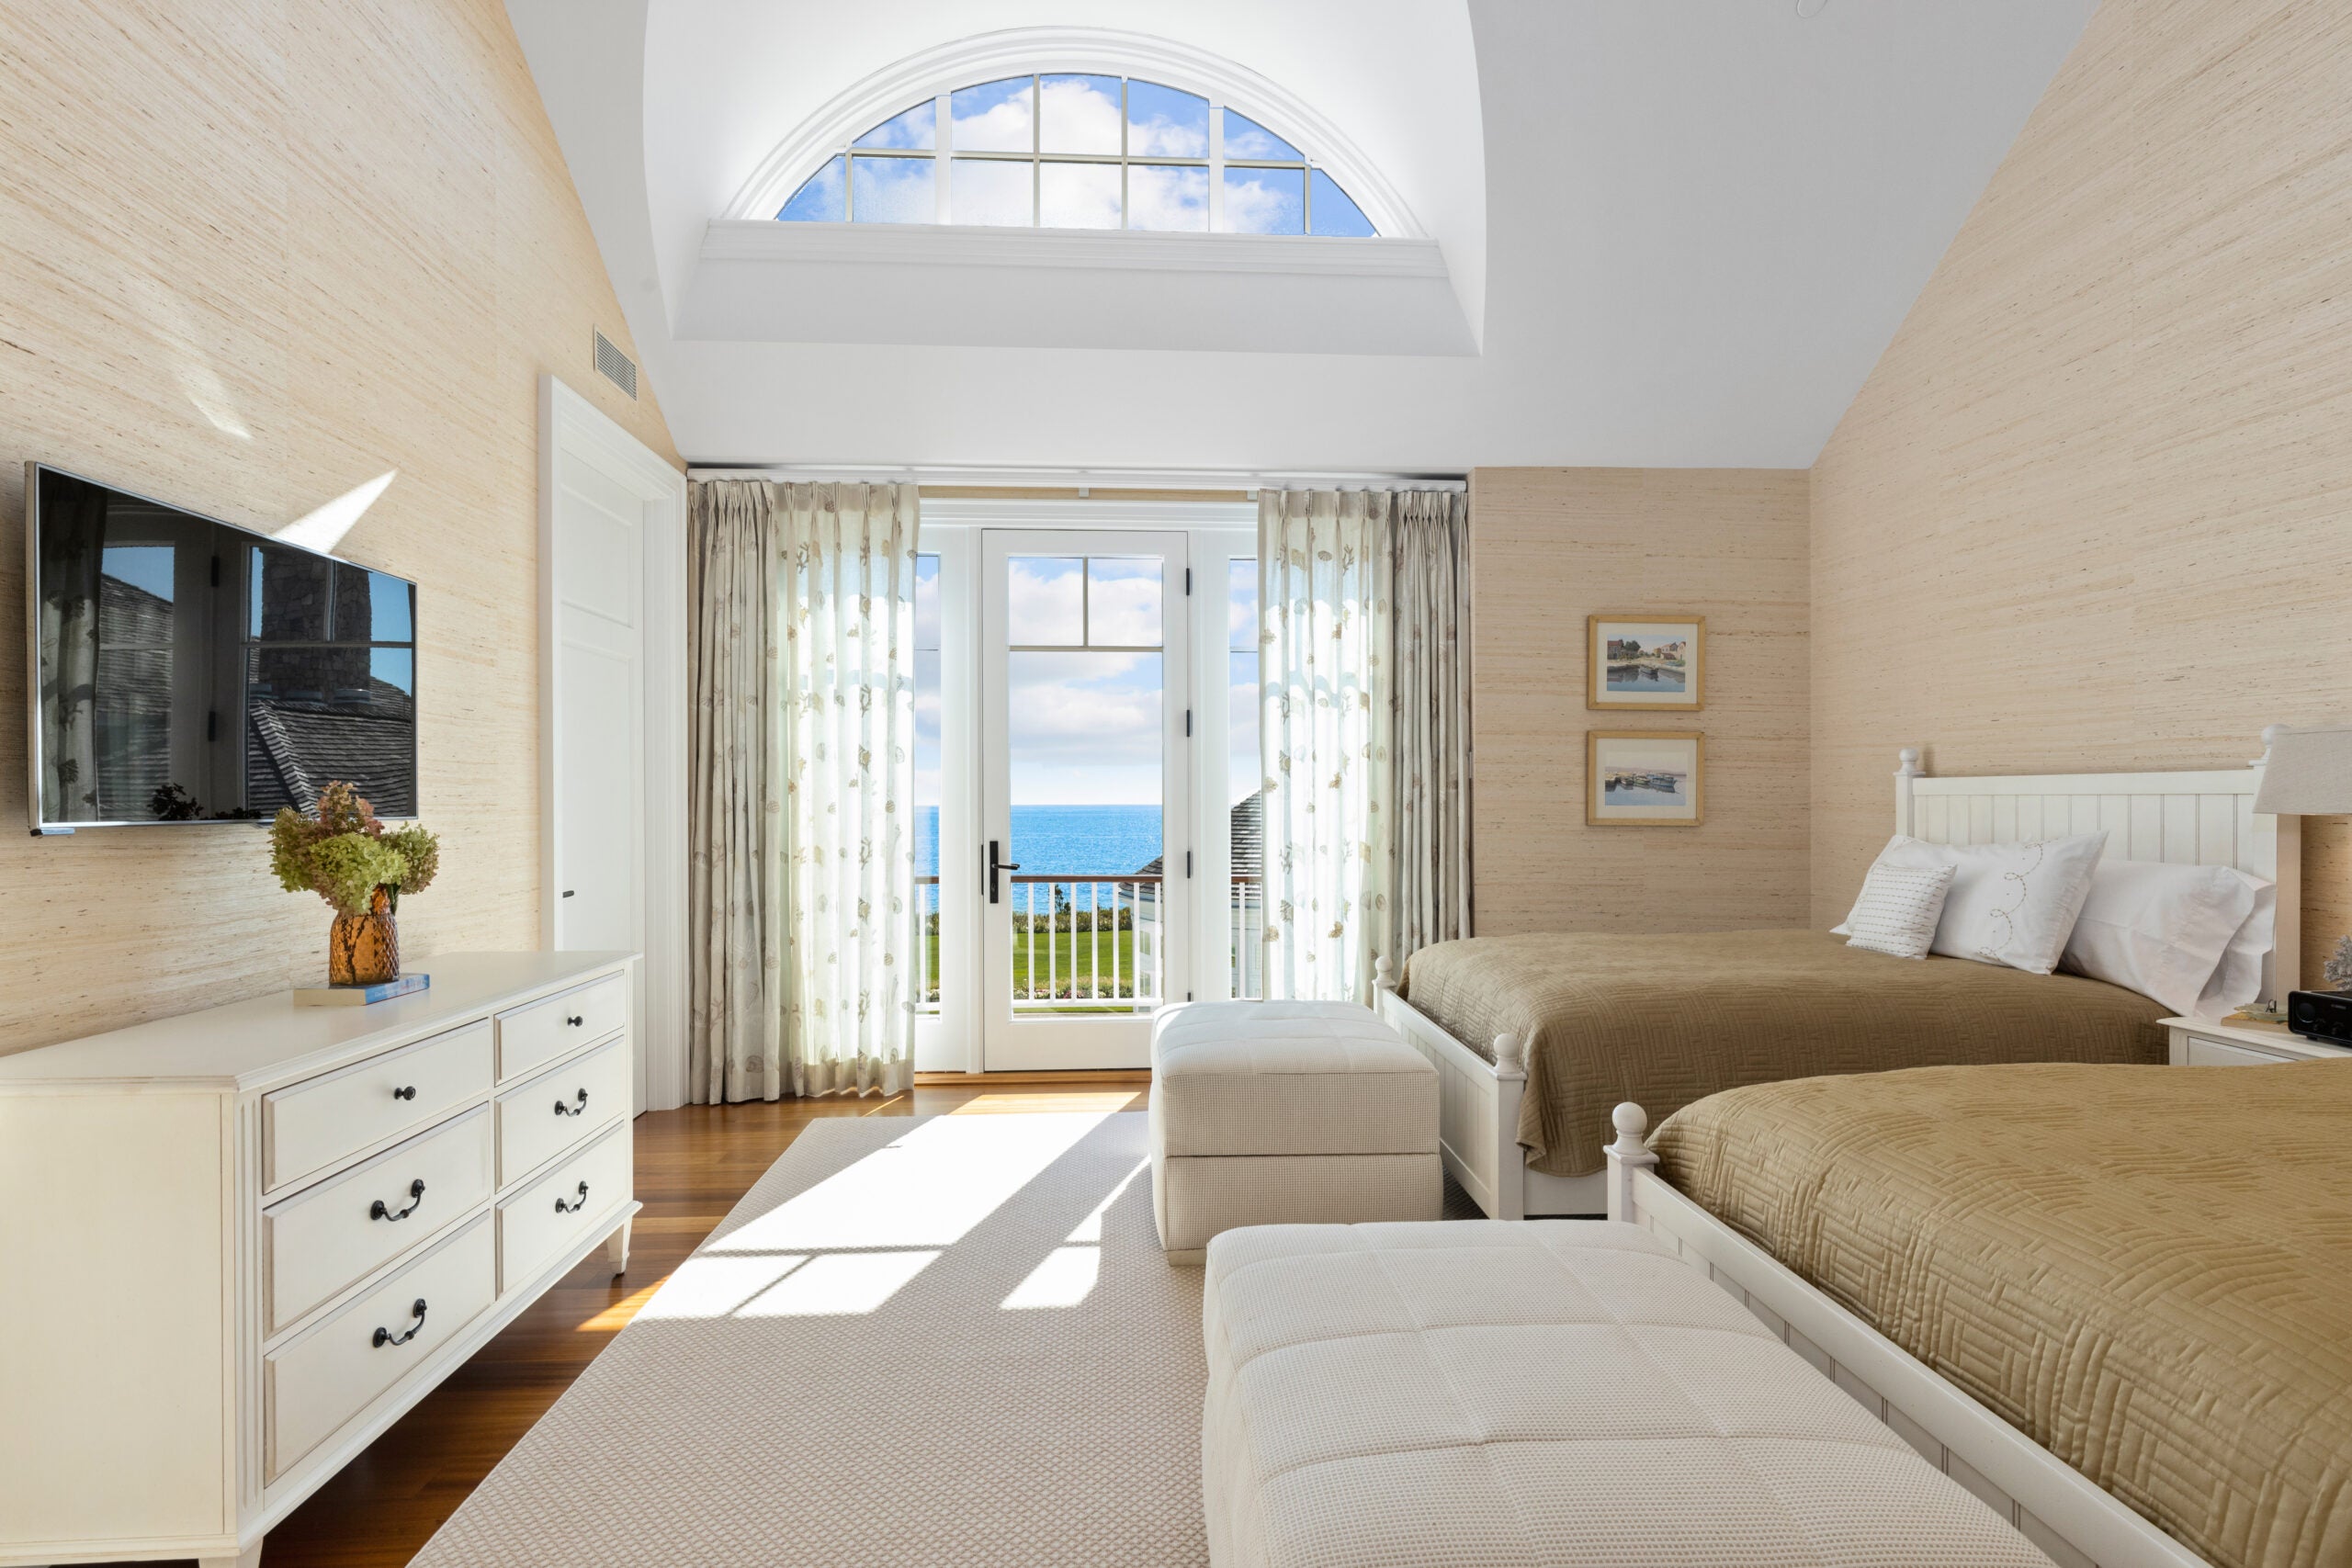 A bedroom with two matching wooden king-size beds. An overstuffed ottoman sits at the end of each bed. The bed linens are a light gold, which matches the grasscloth wallpaper. A slider with gauzy floral drapes partially covers a glass door to a deck overlooking the ocean and a section of the house. An muntined oval window is inset into the ceiling. A TV hangs over a white dresser, and the hardwood floor is covered in a white rug.